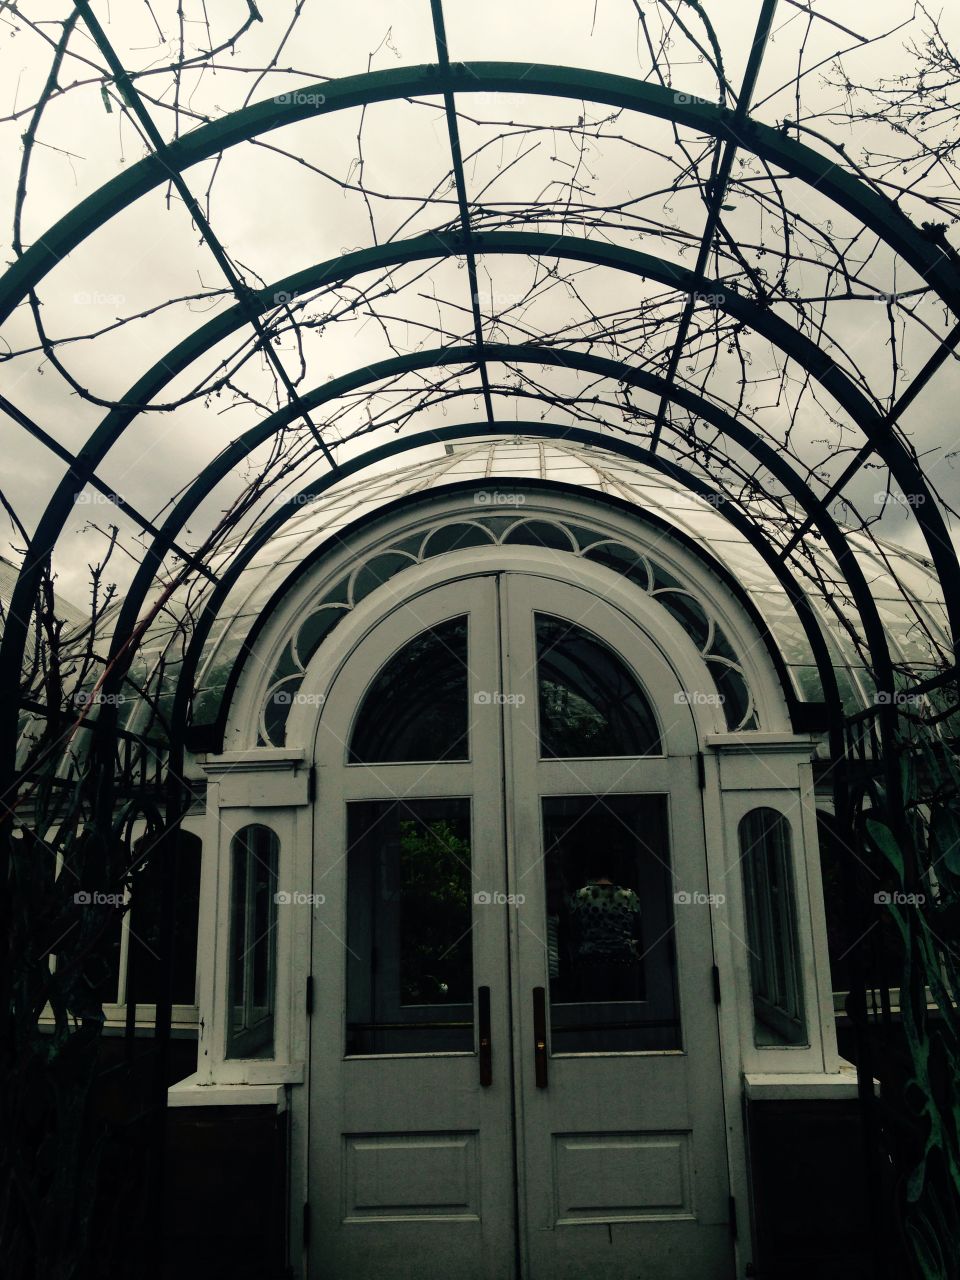 Open Doors. Outside the Phipps Greenhouse in Pittsburgh. 